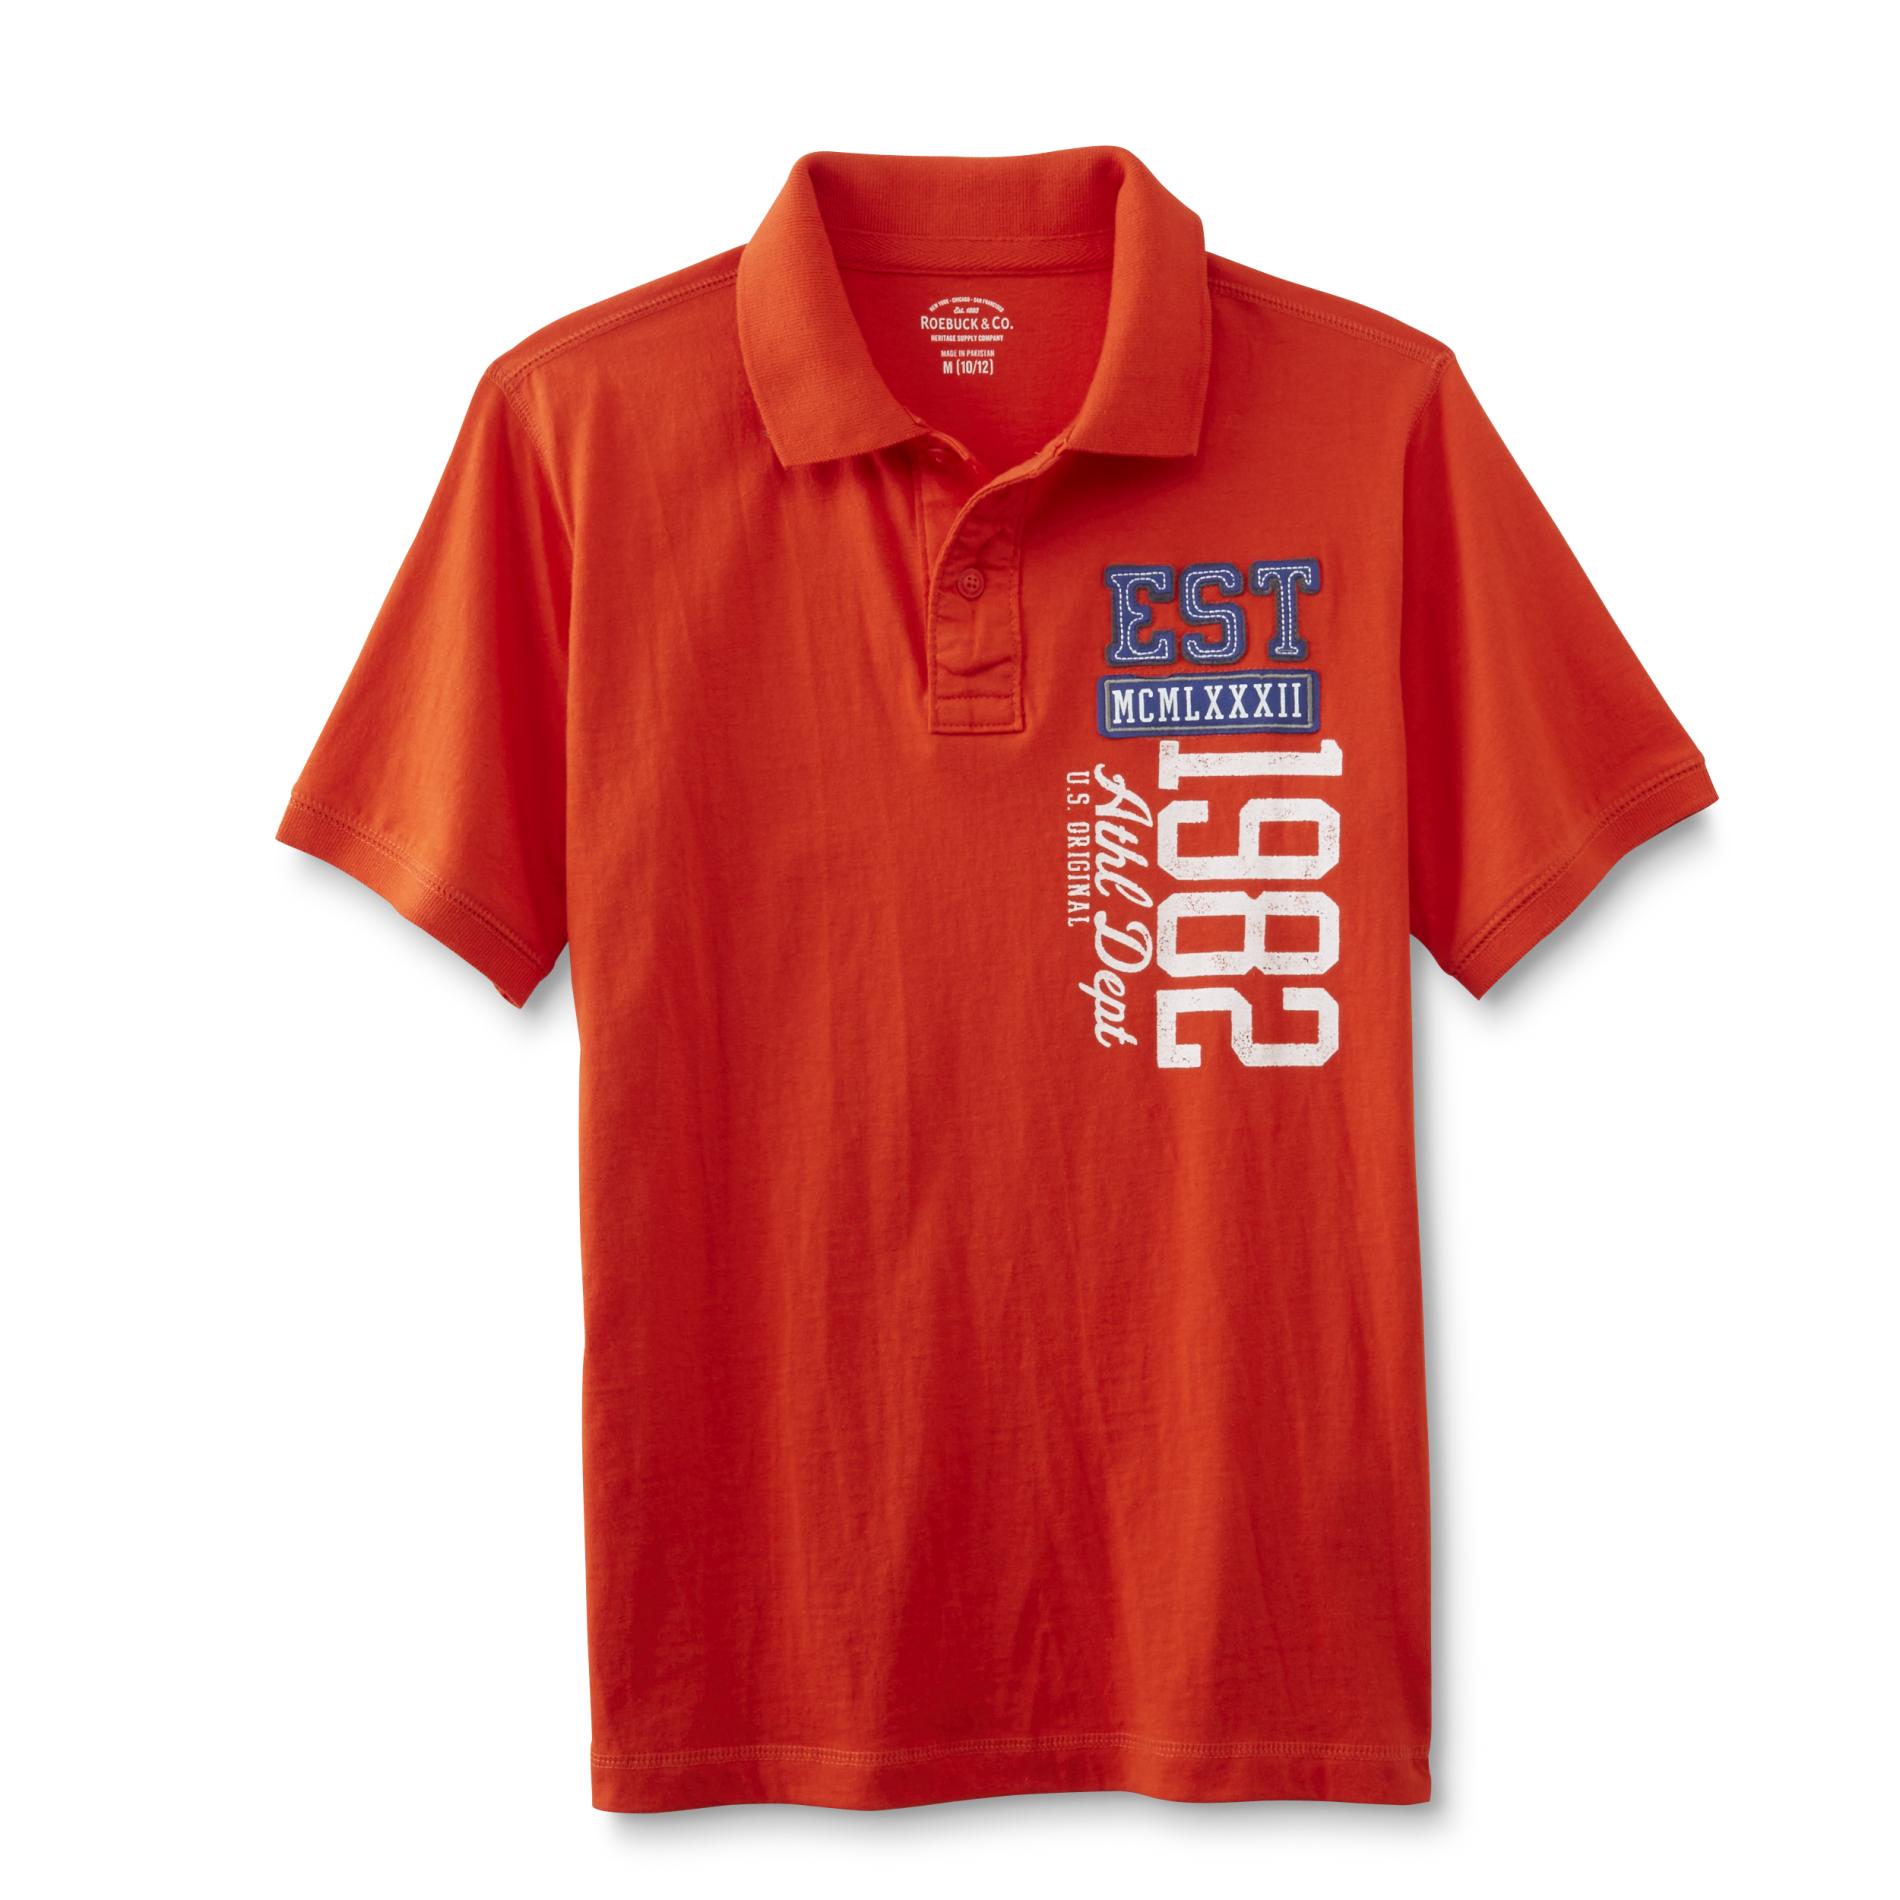 Roebuck & Co. Boy's Graphic Polo Shirt - 1982 Athletic Department